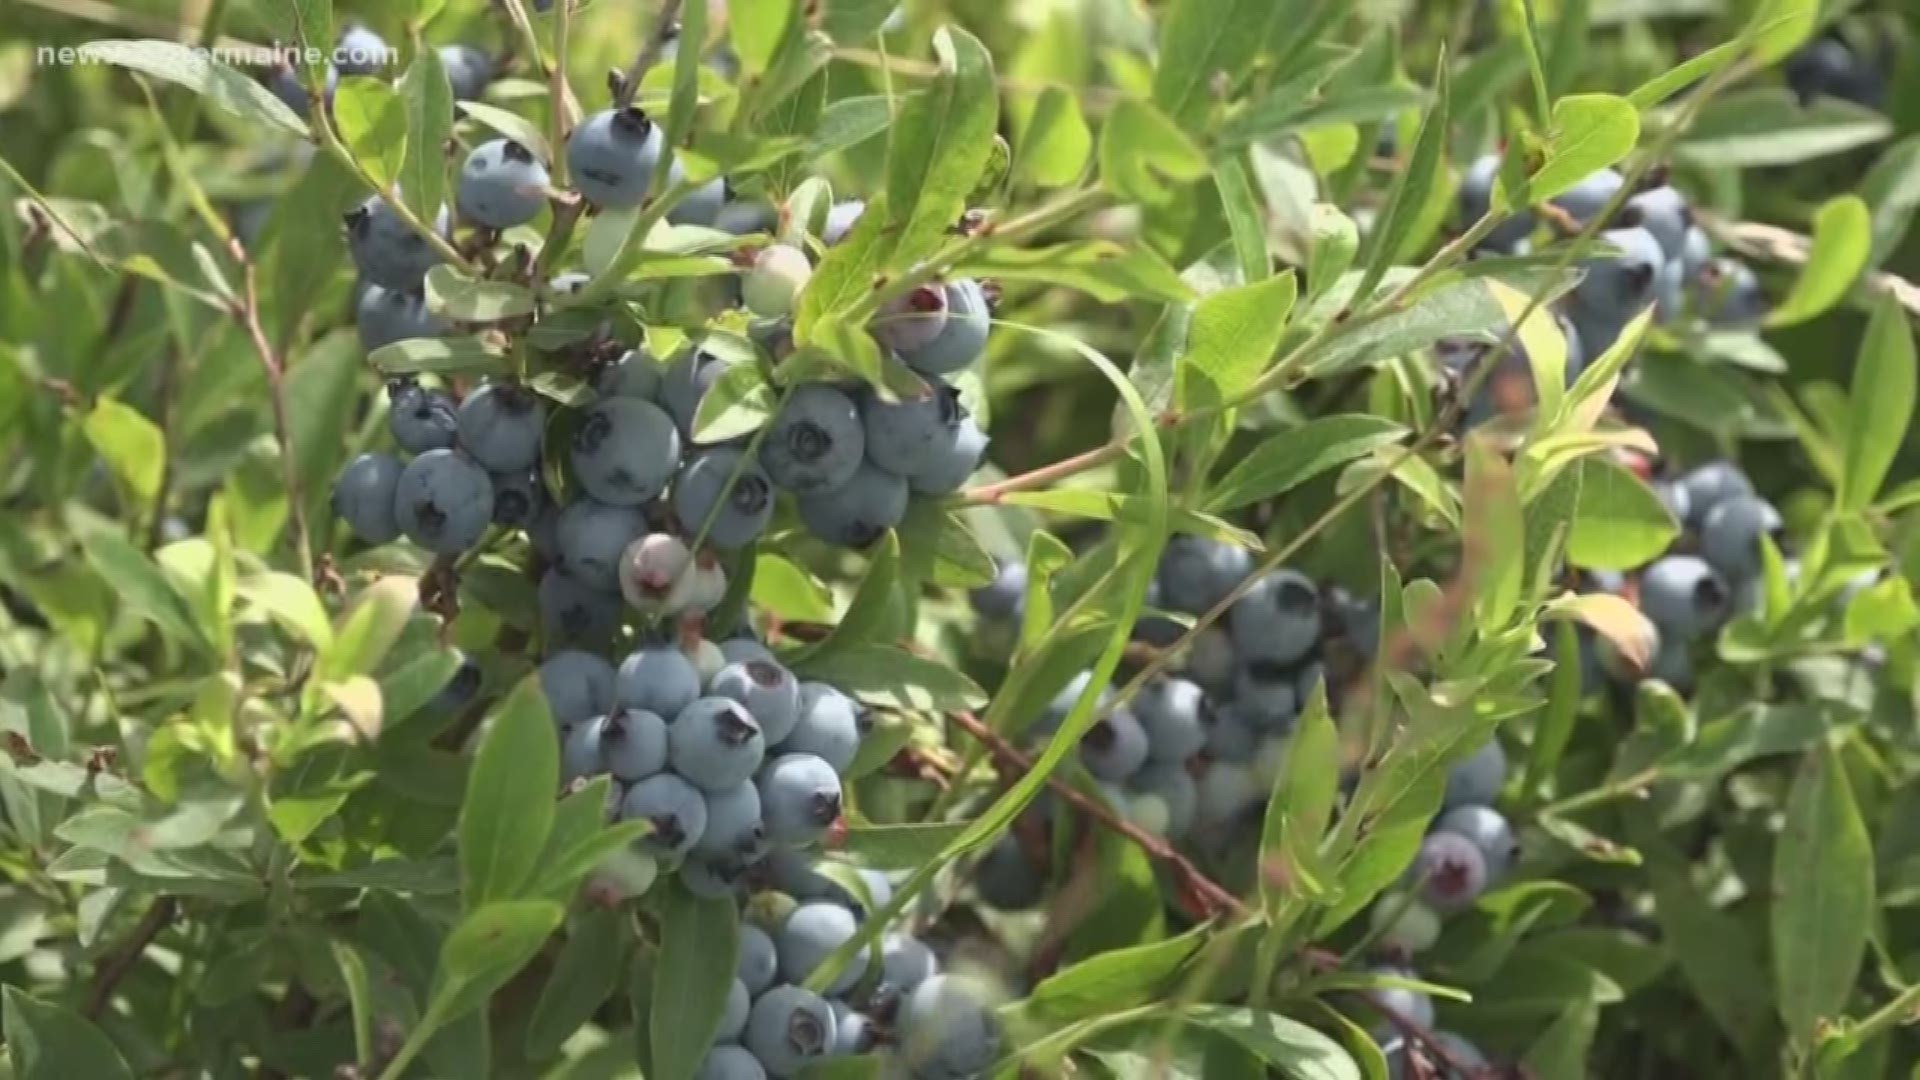 Maine blueberry growers may not get much relief from a federal program that is supposed to help with business lost due to trade disruptions.